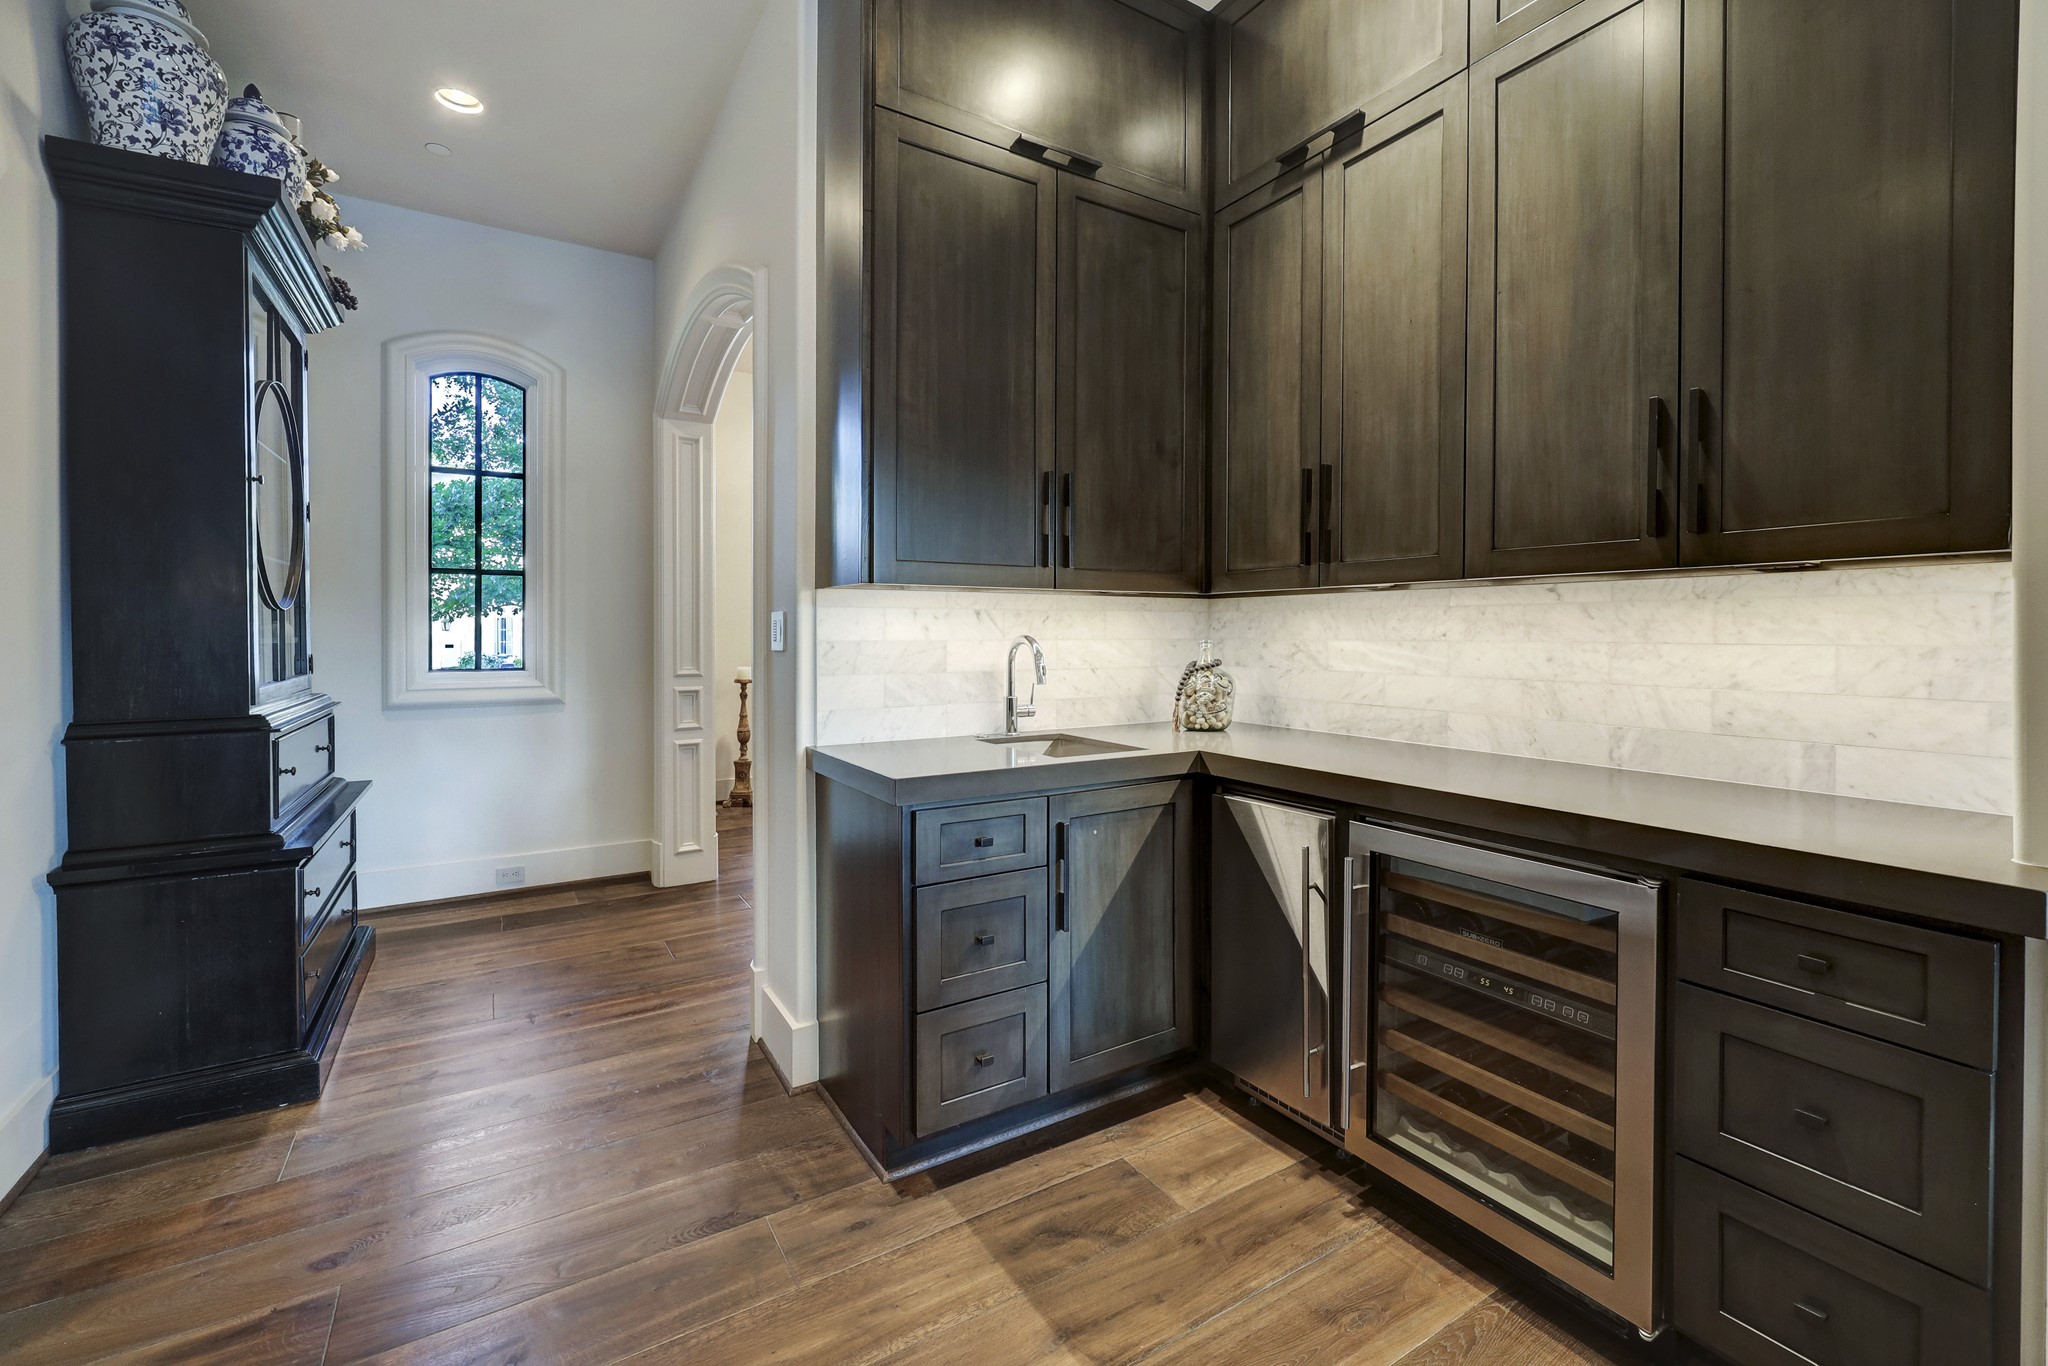 Located off the kitchen, the wet bar features a nugget ice maker, wine cooler, sink, and custom cabinetry with soft close cabinets and under cabinetry lighting.